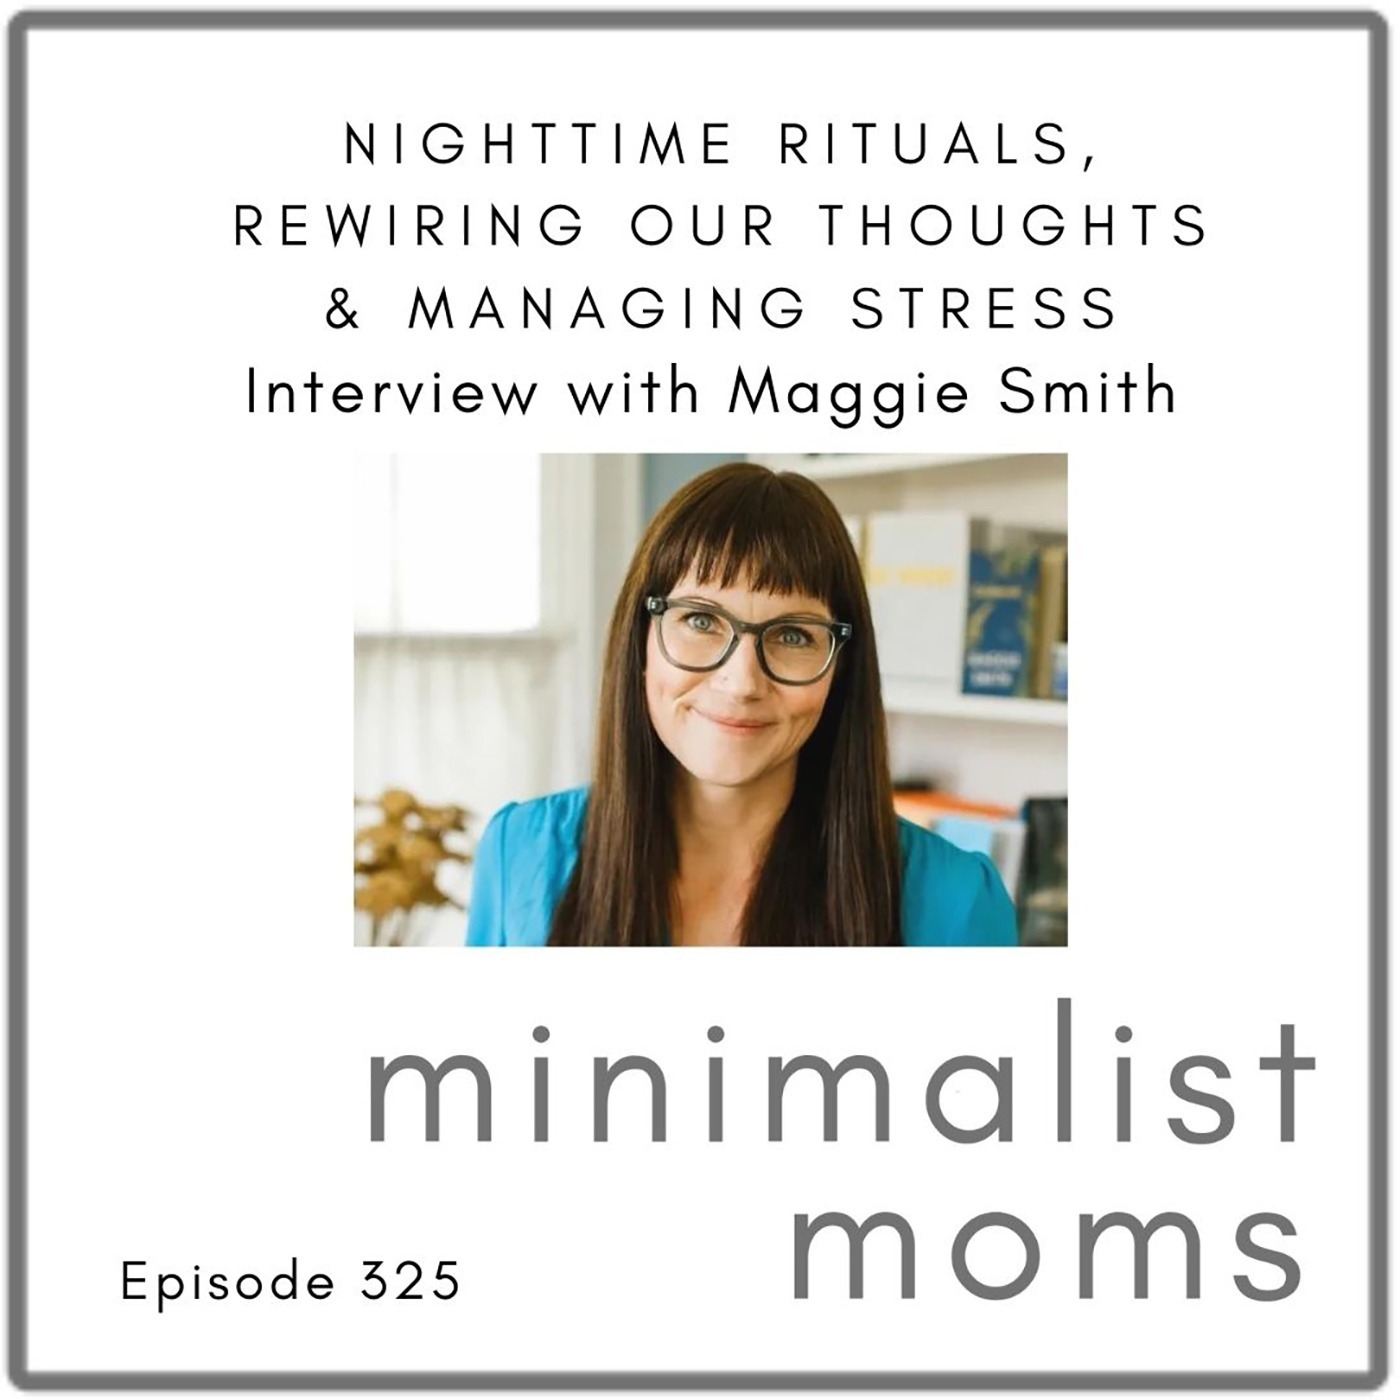 Maggie Smith On Nighttime Rituals, Rewiring Our Thoughts & Managing Stress (EP325)